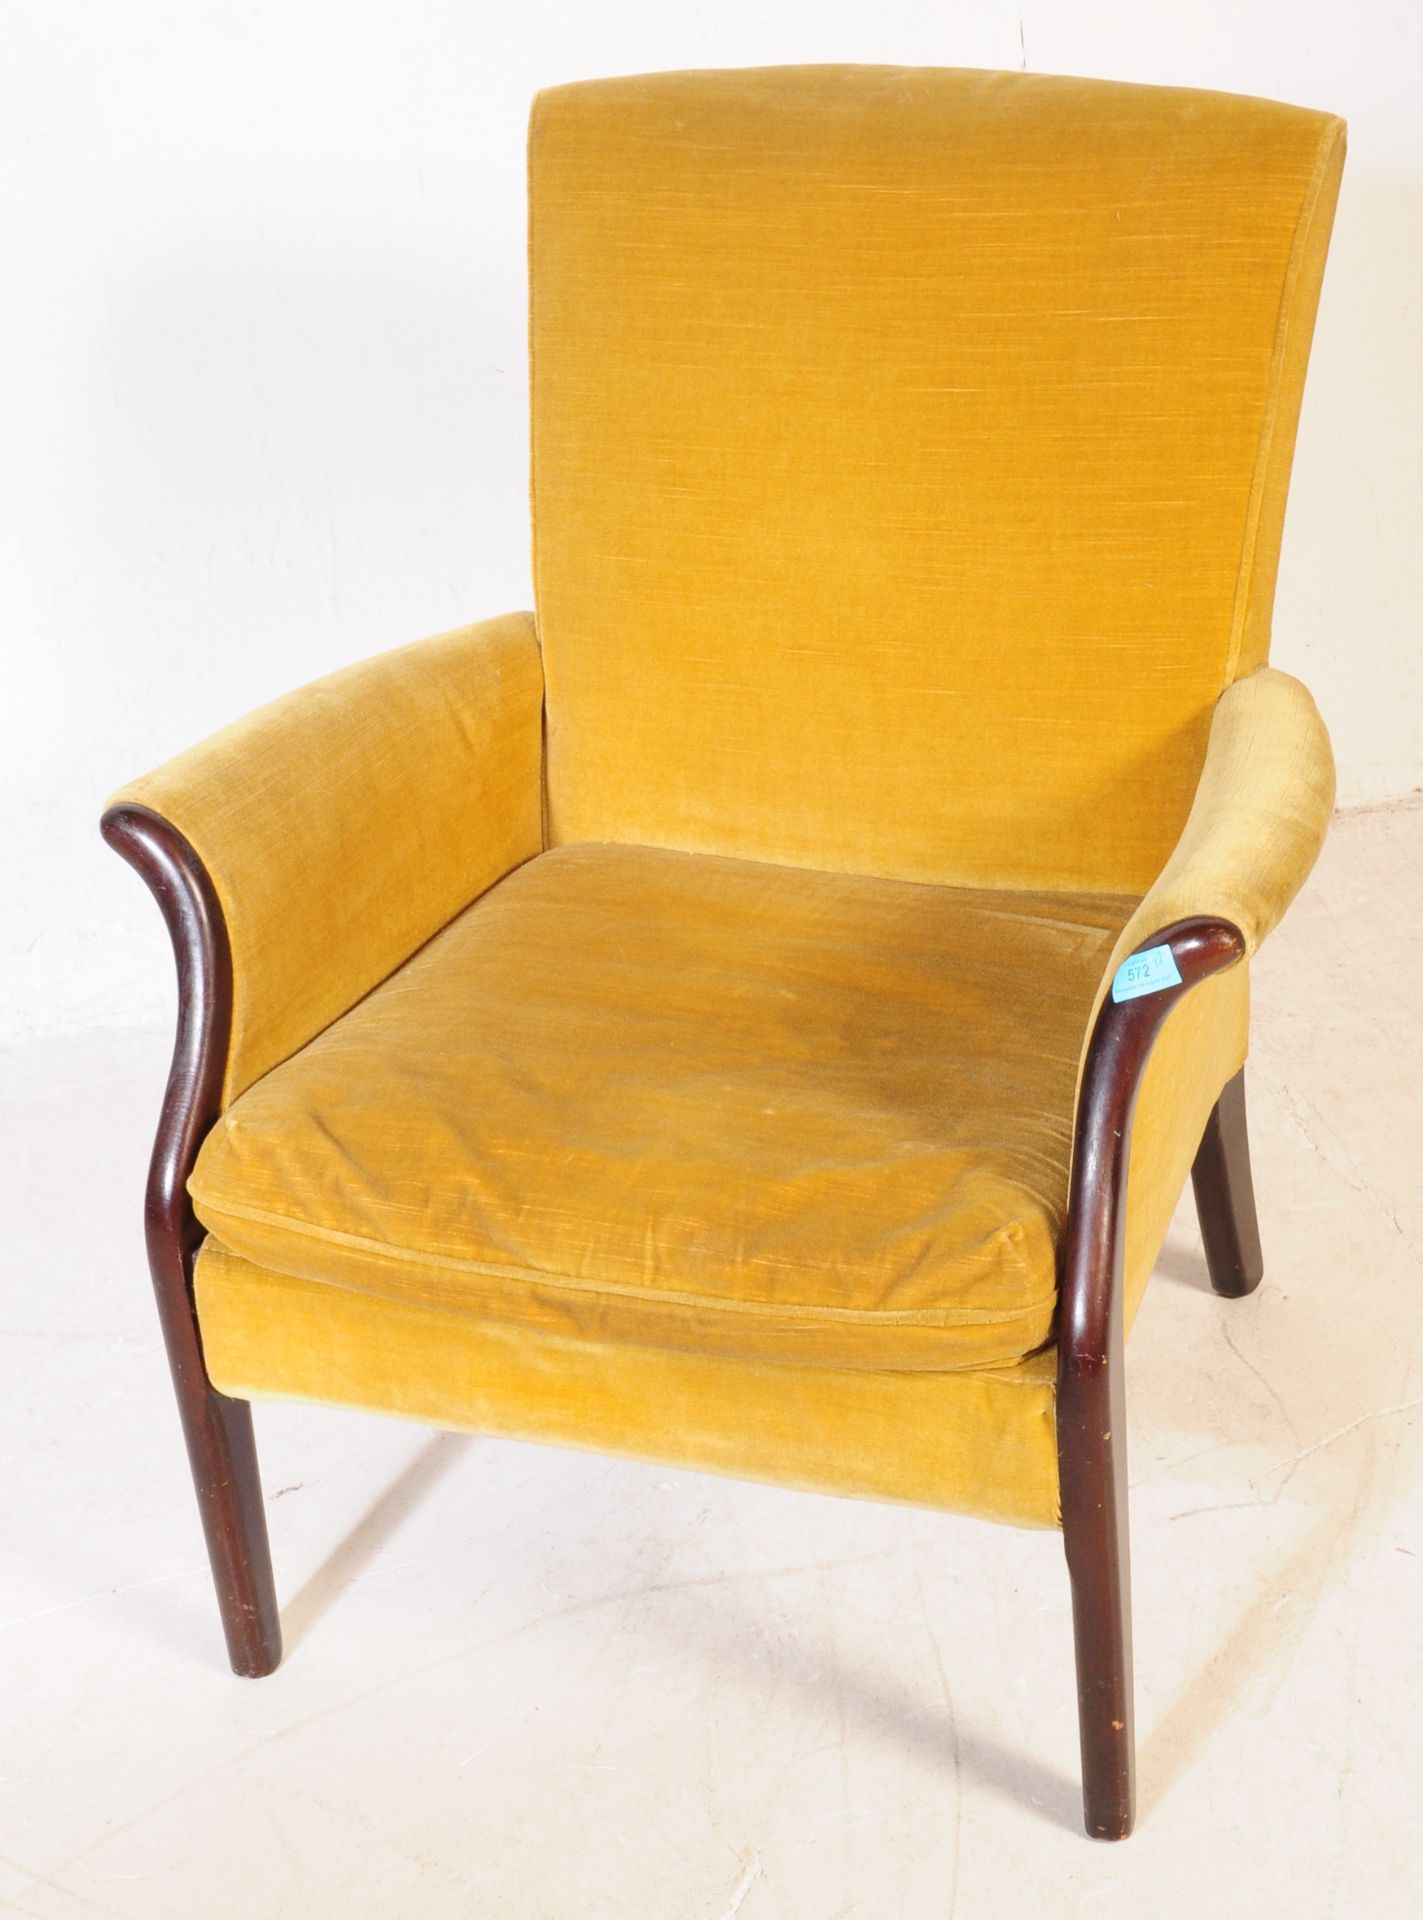 PARKER KNOLL - MID 20TH CENTURY RETRO YELLOW ARMCHAIR - Image 2 of 3